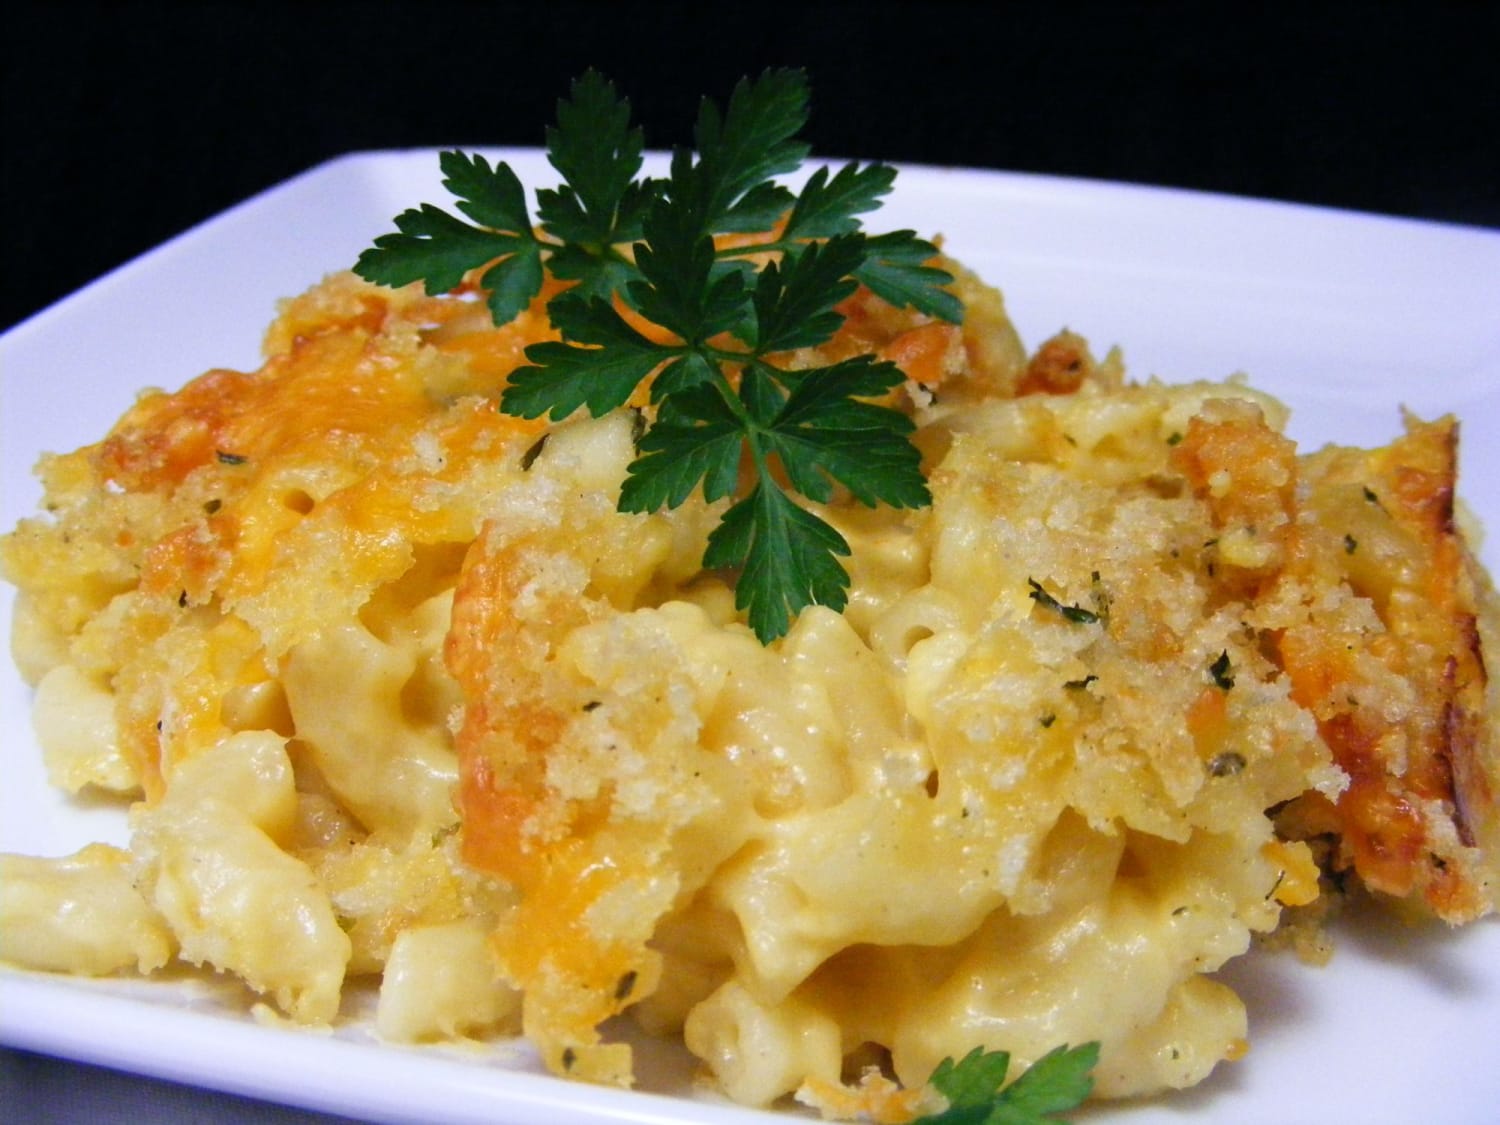 Top Tips from Home Cooks: Making the Best Mac & Cheese Ever